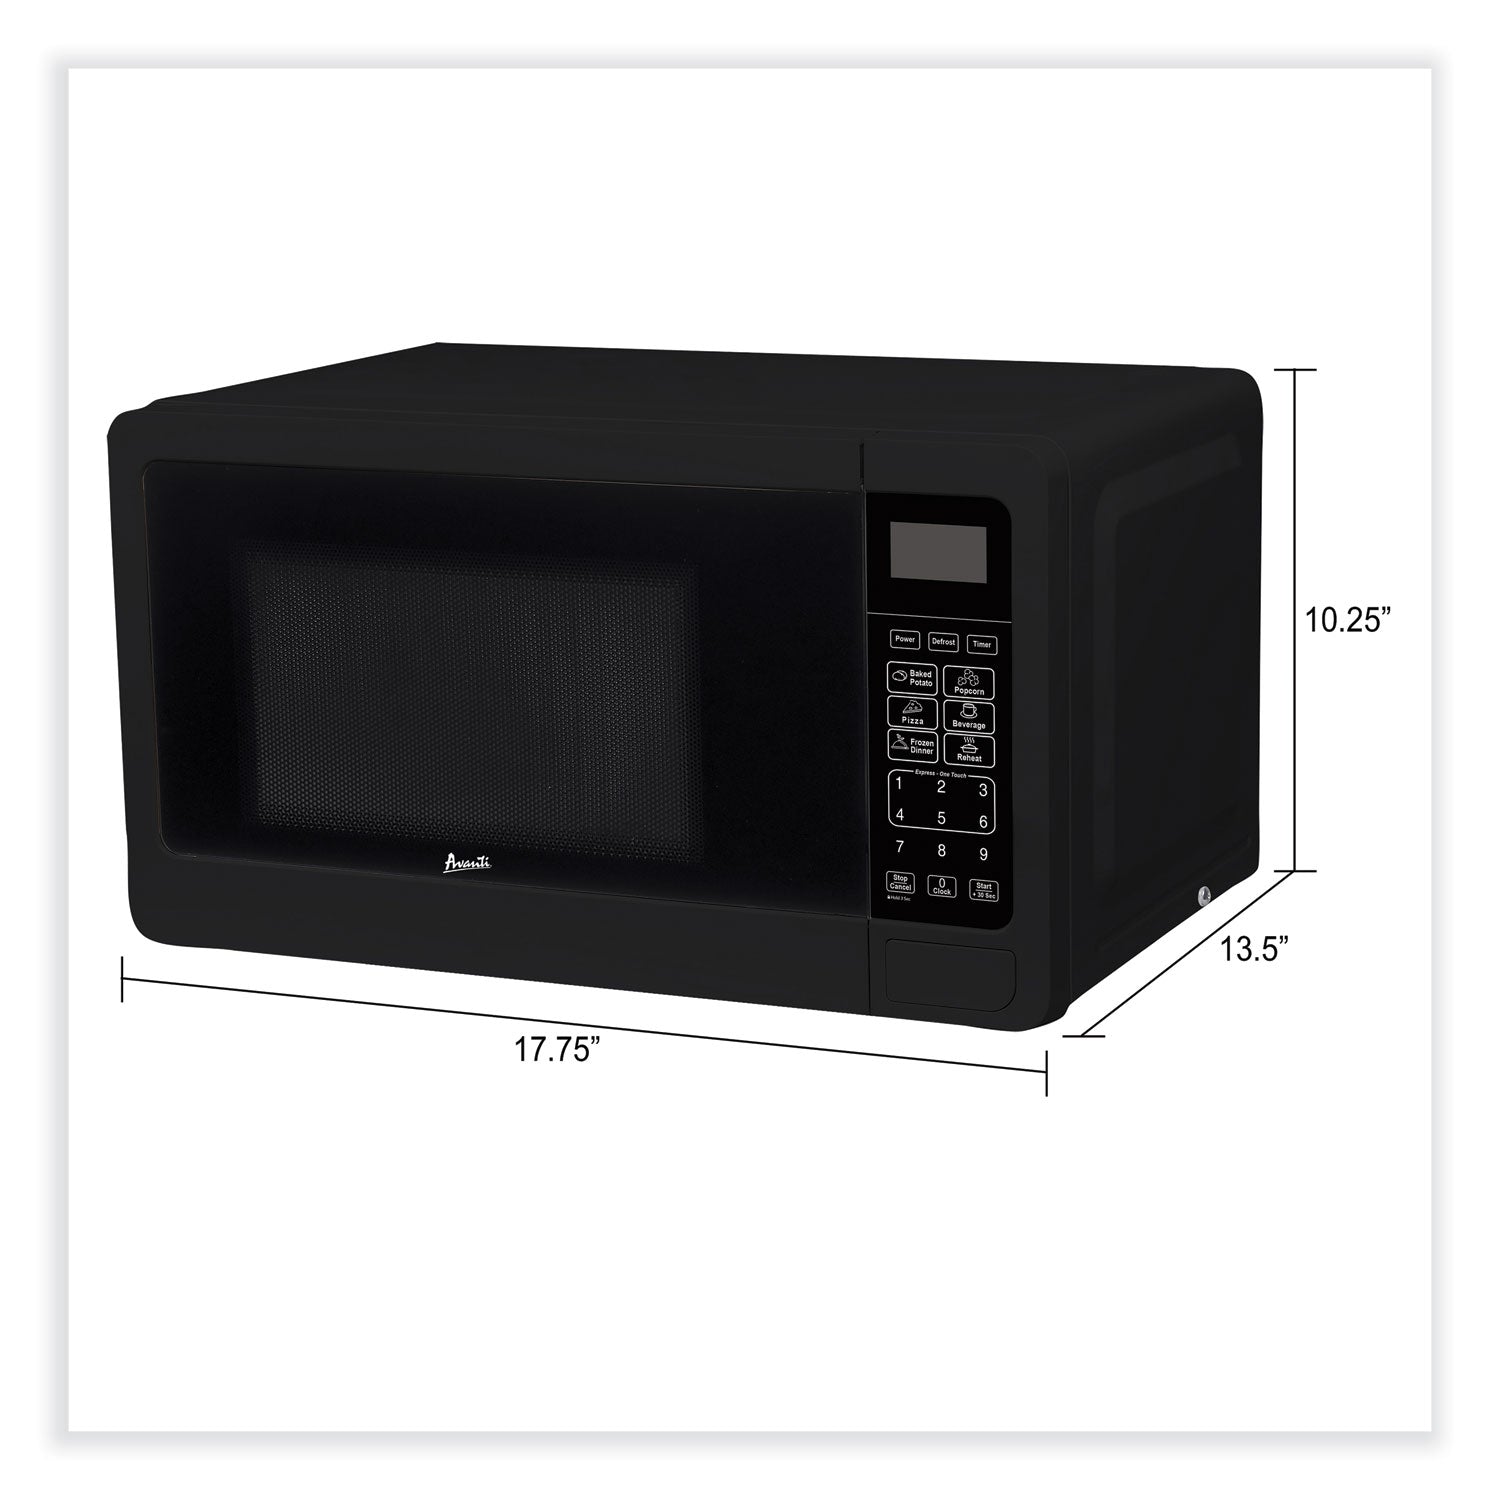 07-cu-ft-microwave-oven-700-watts-black_avamt7v1b - 4